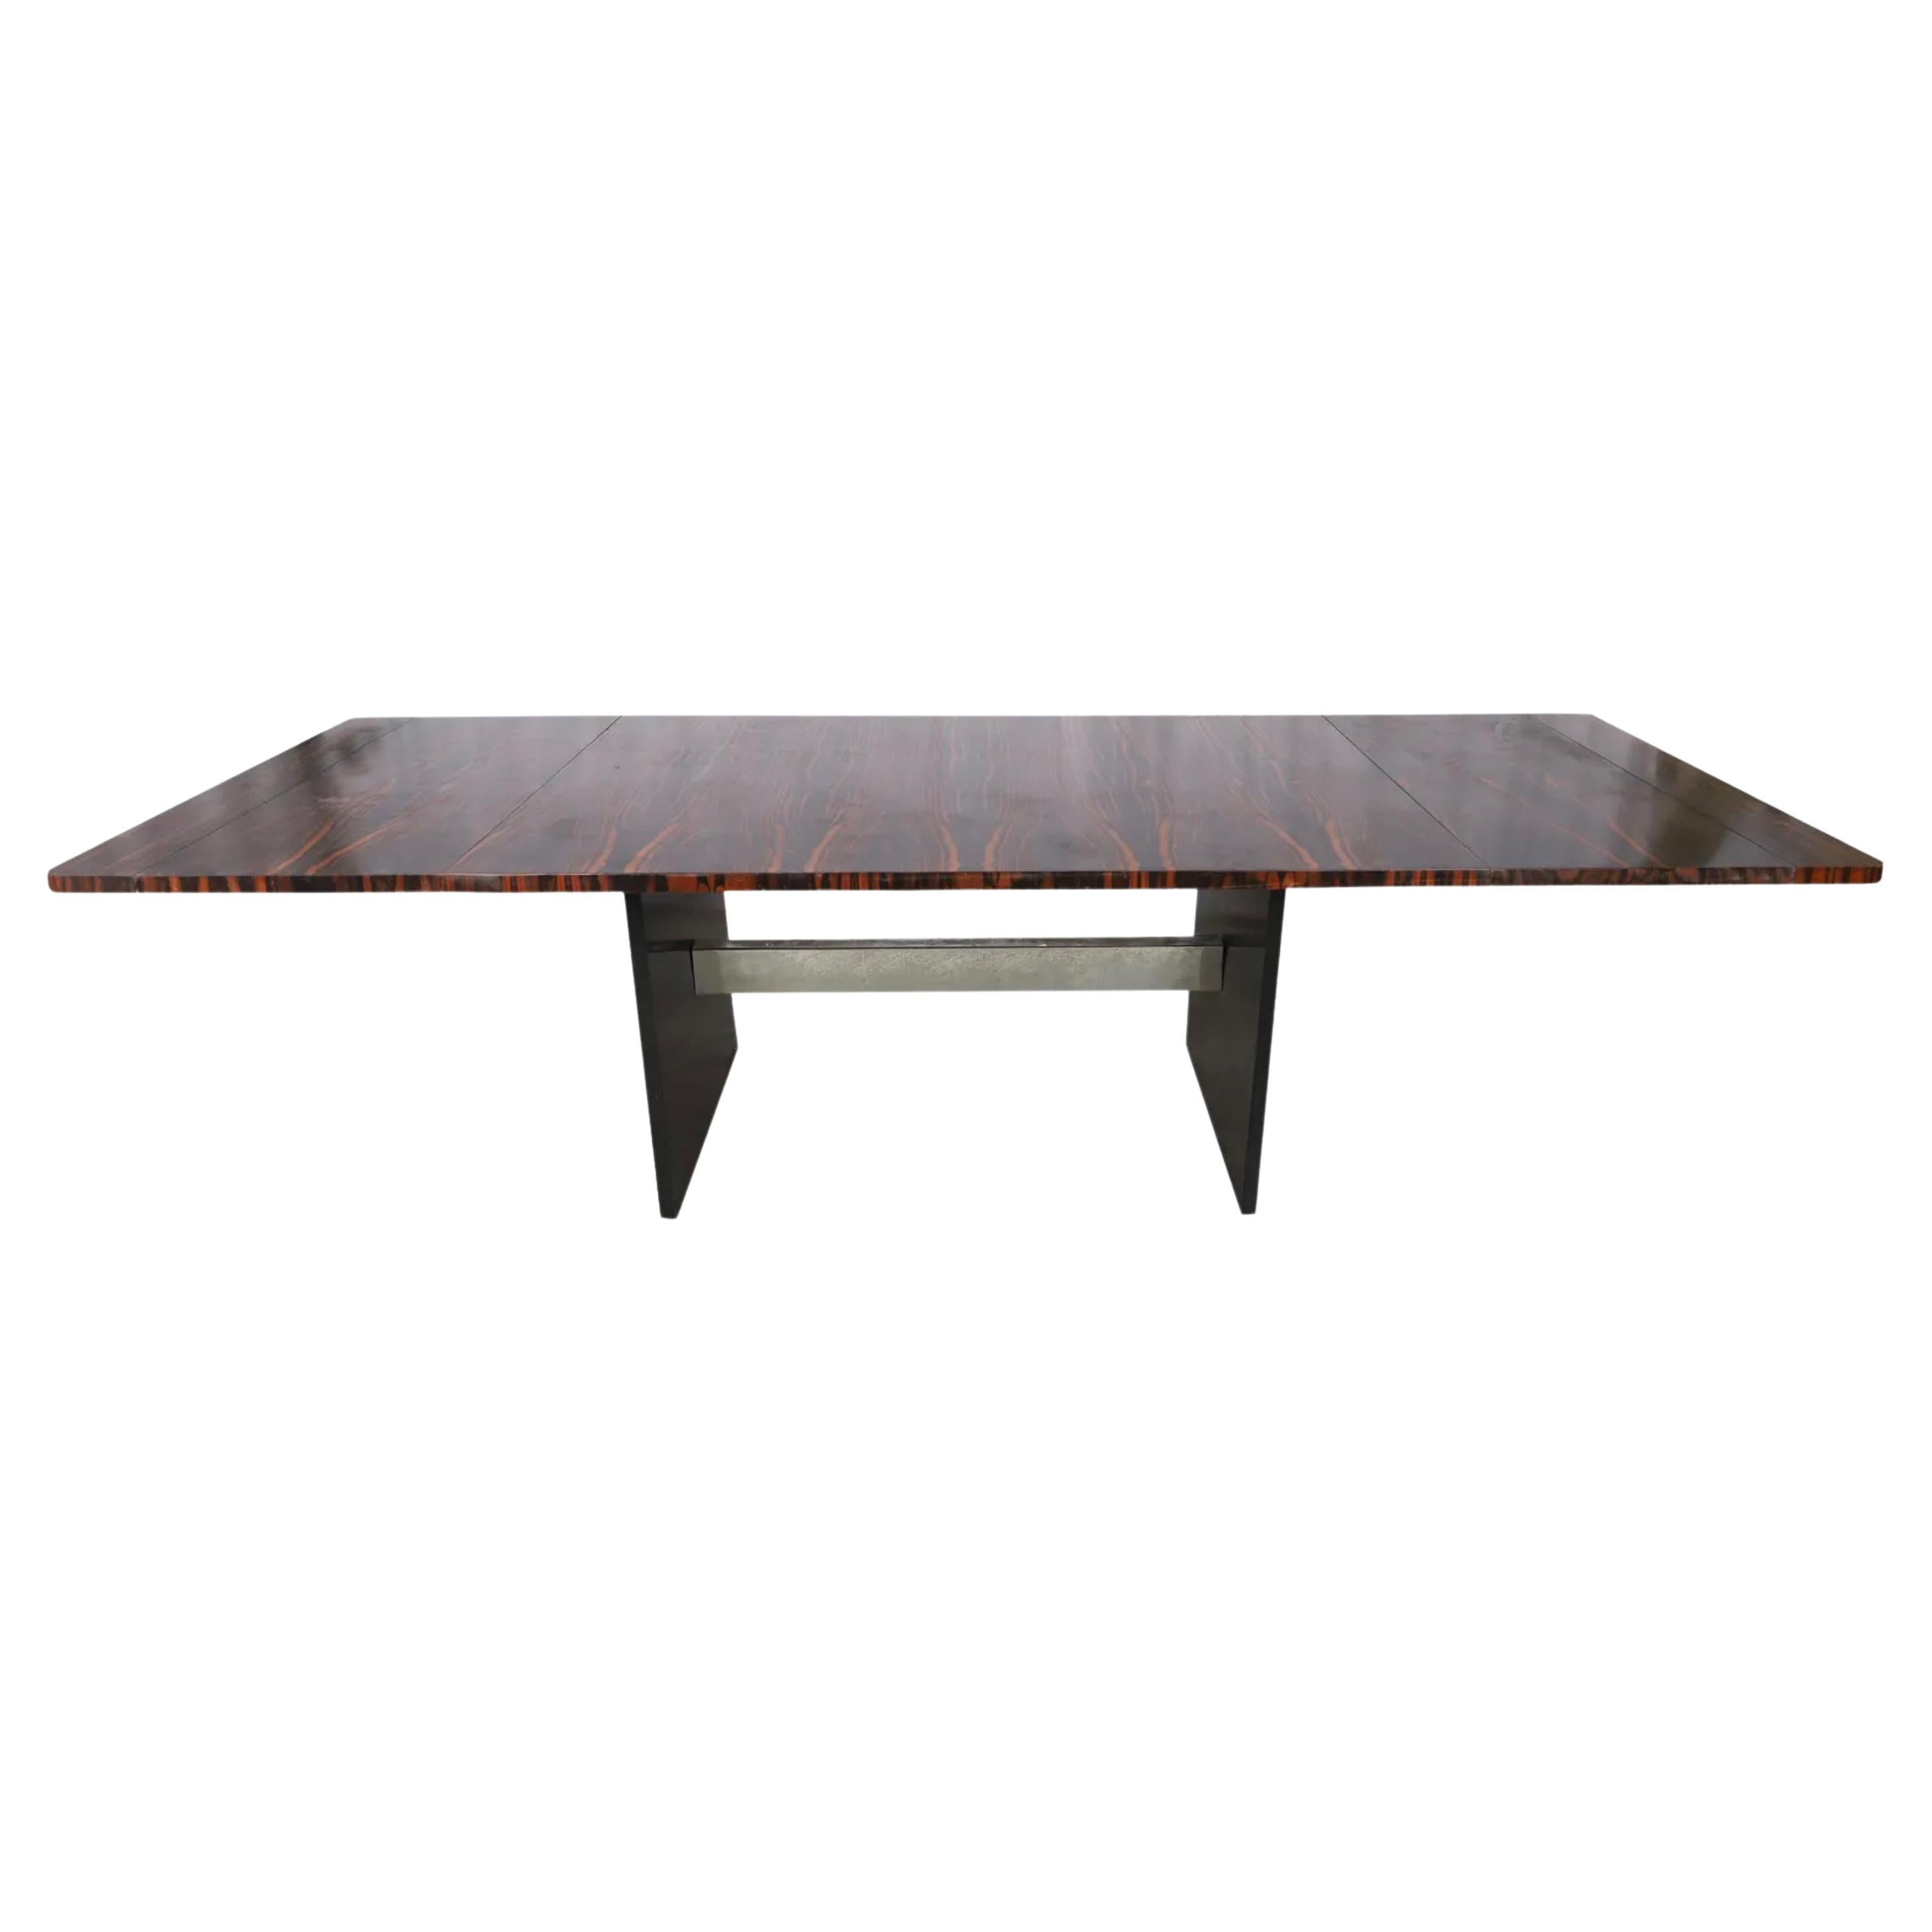 Mid-Century Modern Superb Midcentury Brazilian Rosewood Modern Extension Dining Table 2 Leaves For Sale